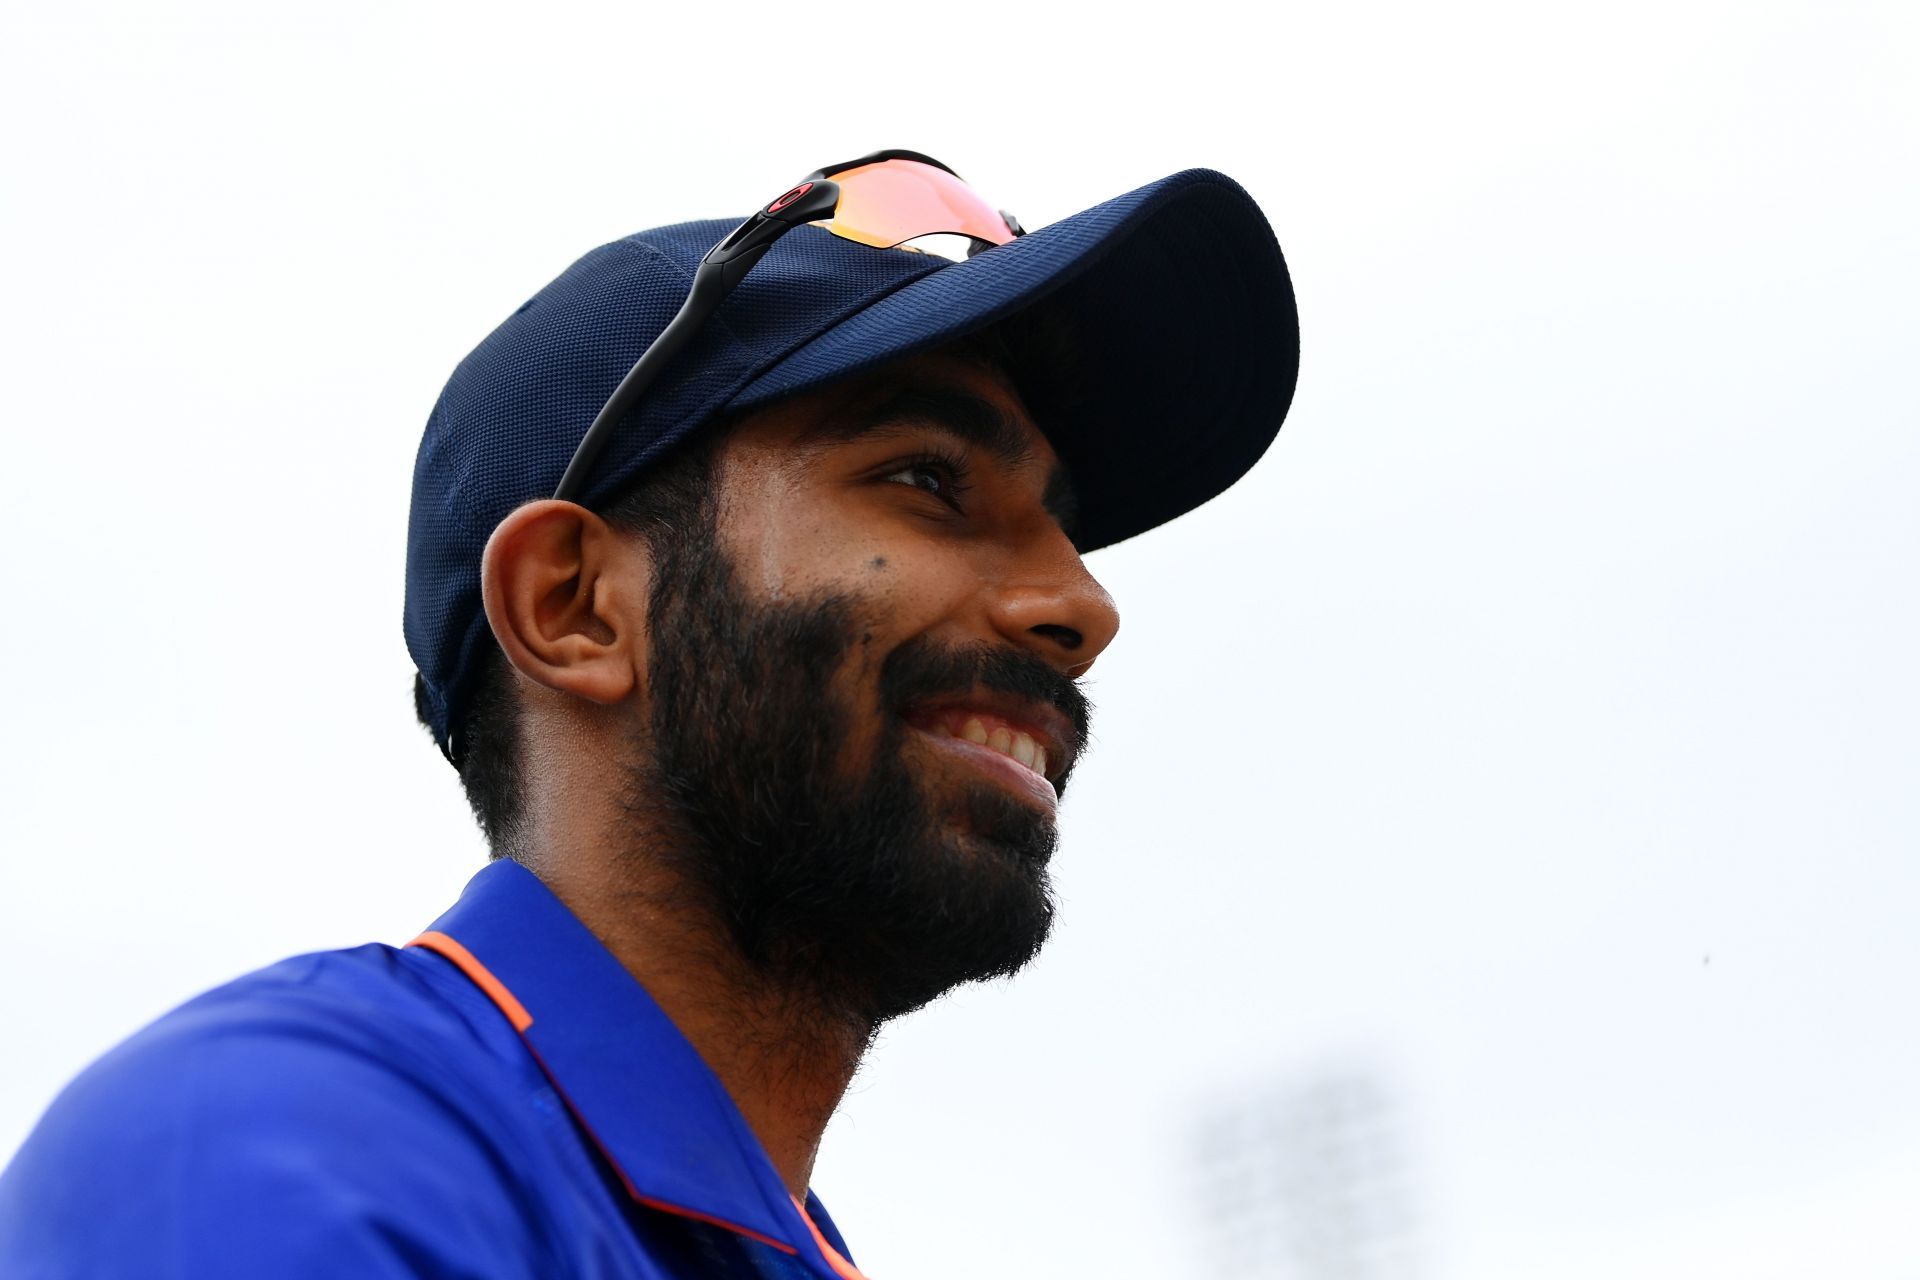 Jasprit Bumrah is the best fast bowler in India right now (Image: Getty)